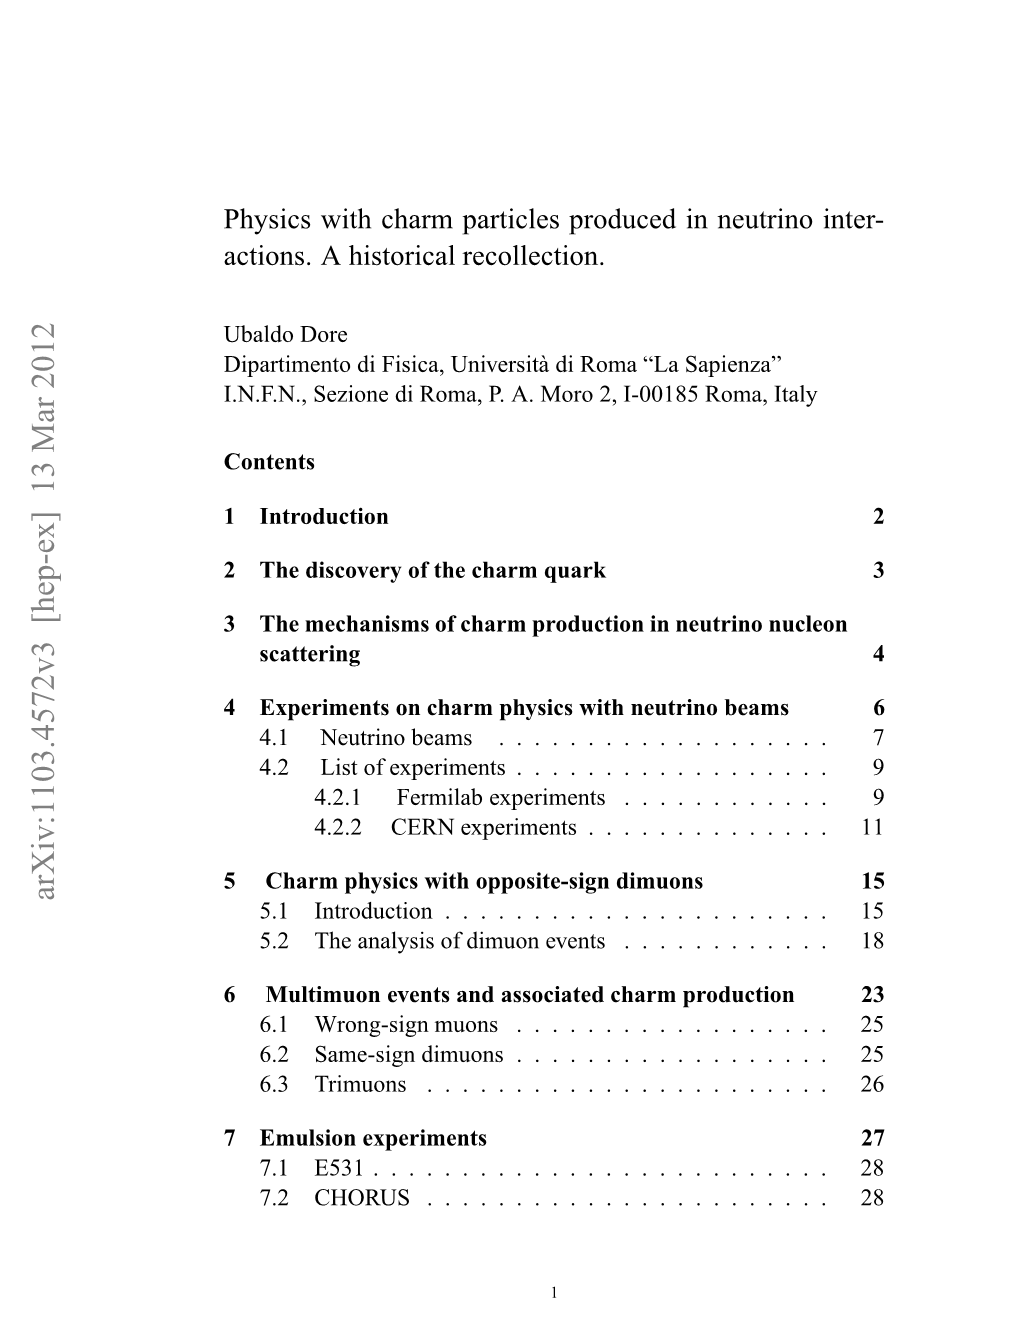 Physics with Charm Particles Produced in Neutrino Interactions. a Historical